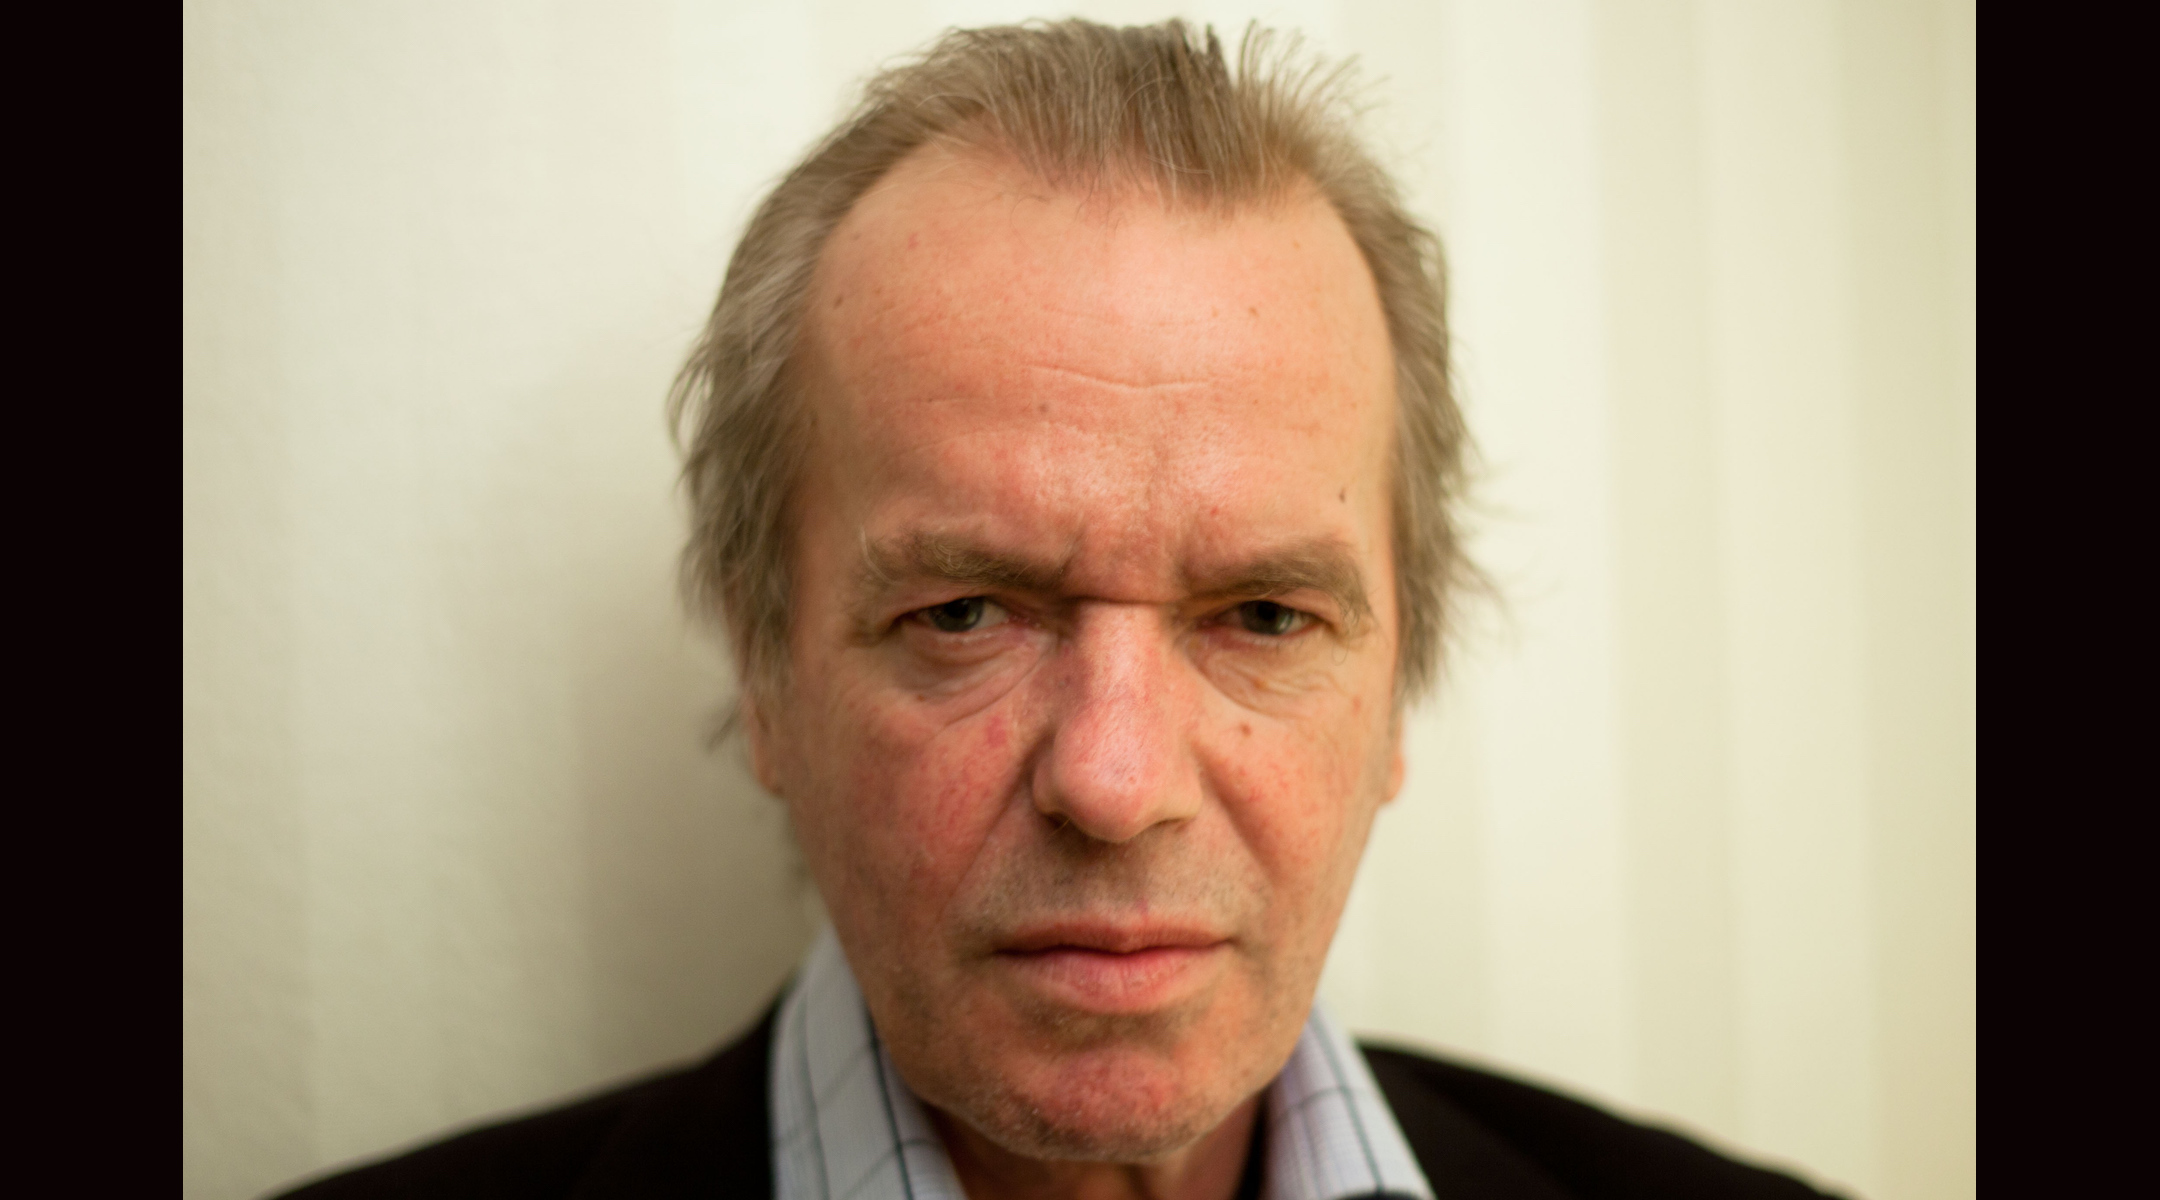 The English author Martin Amis, photographed by Maximilian Schönherr in a hotel suite in Cologne, Germany, March 17, 2012. (Maximilian Schönherr via Creative Commons)